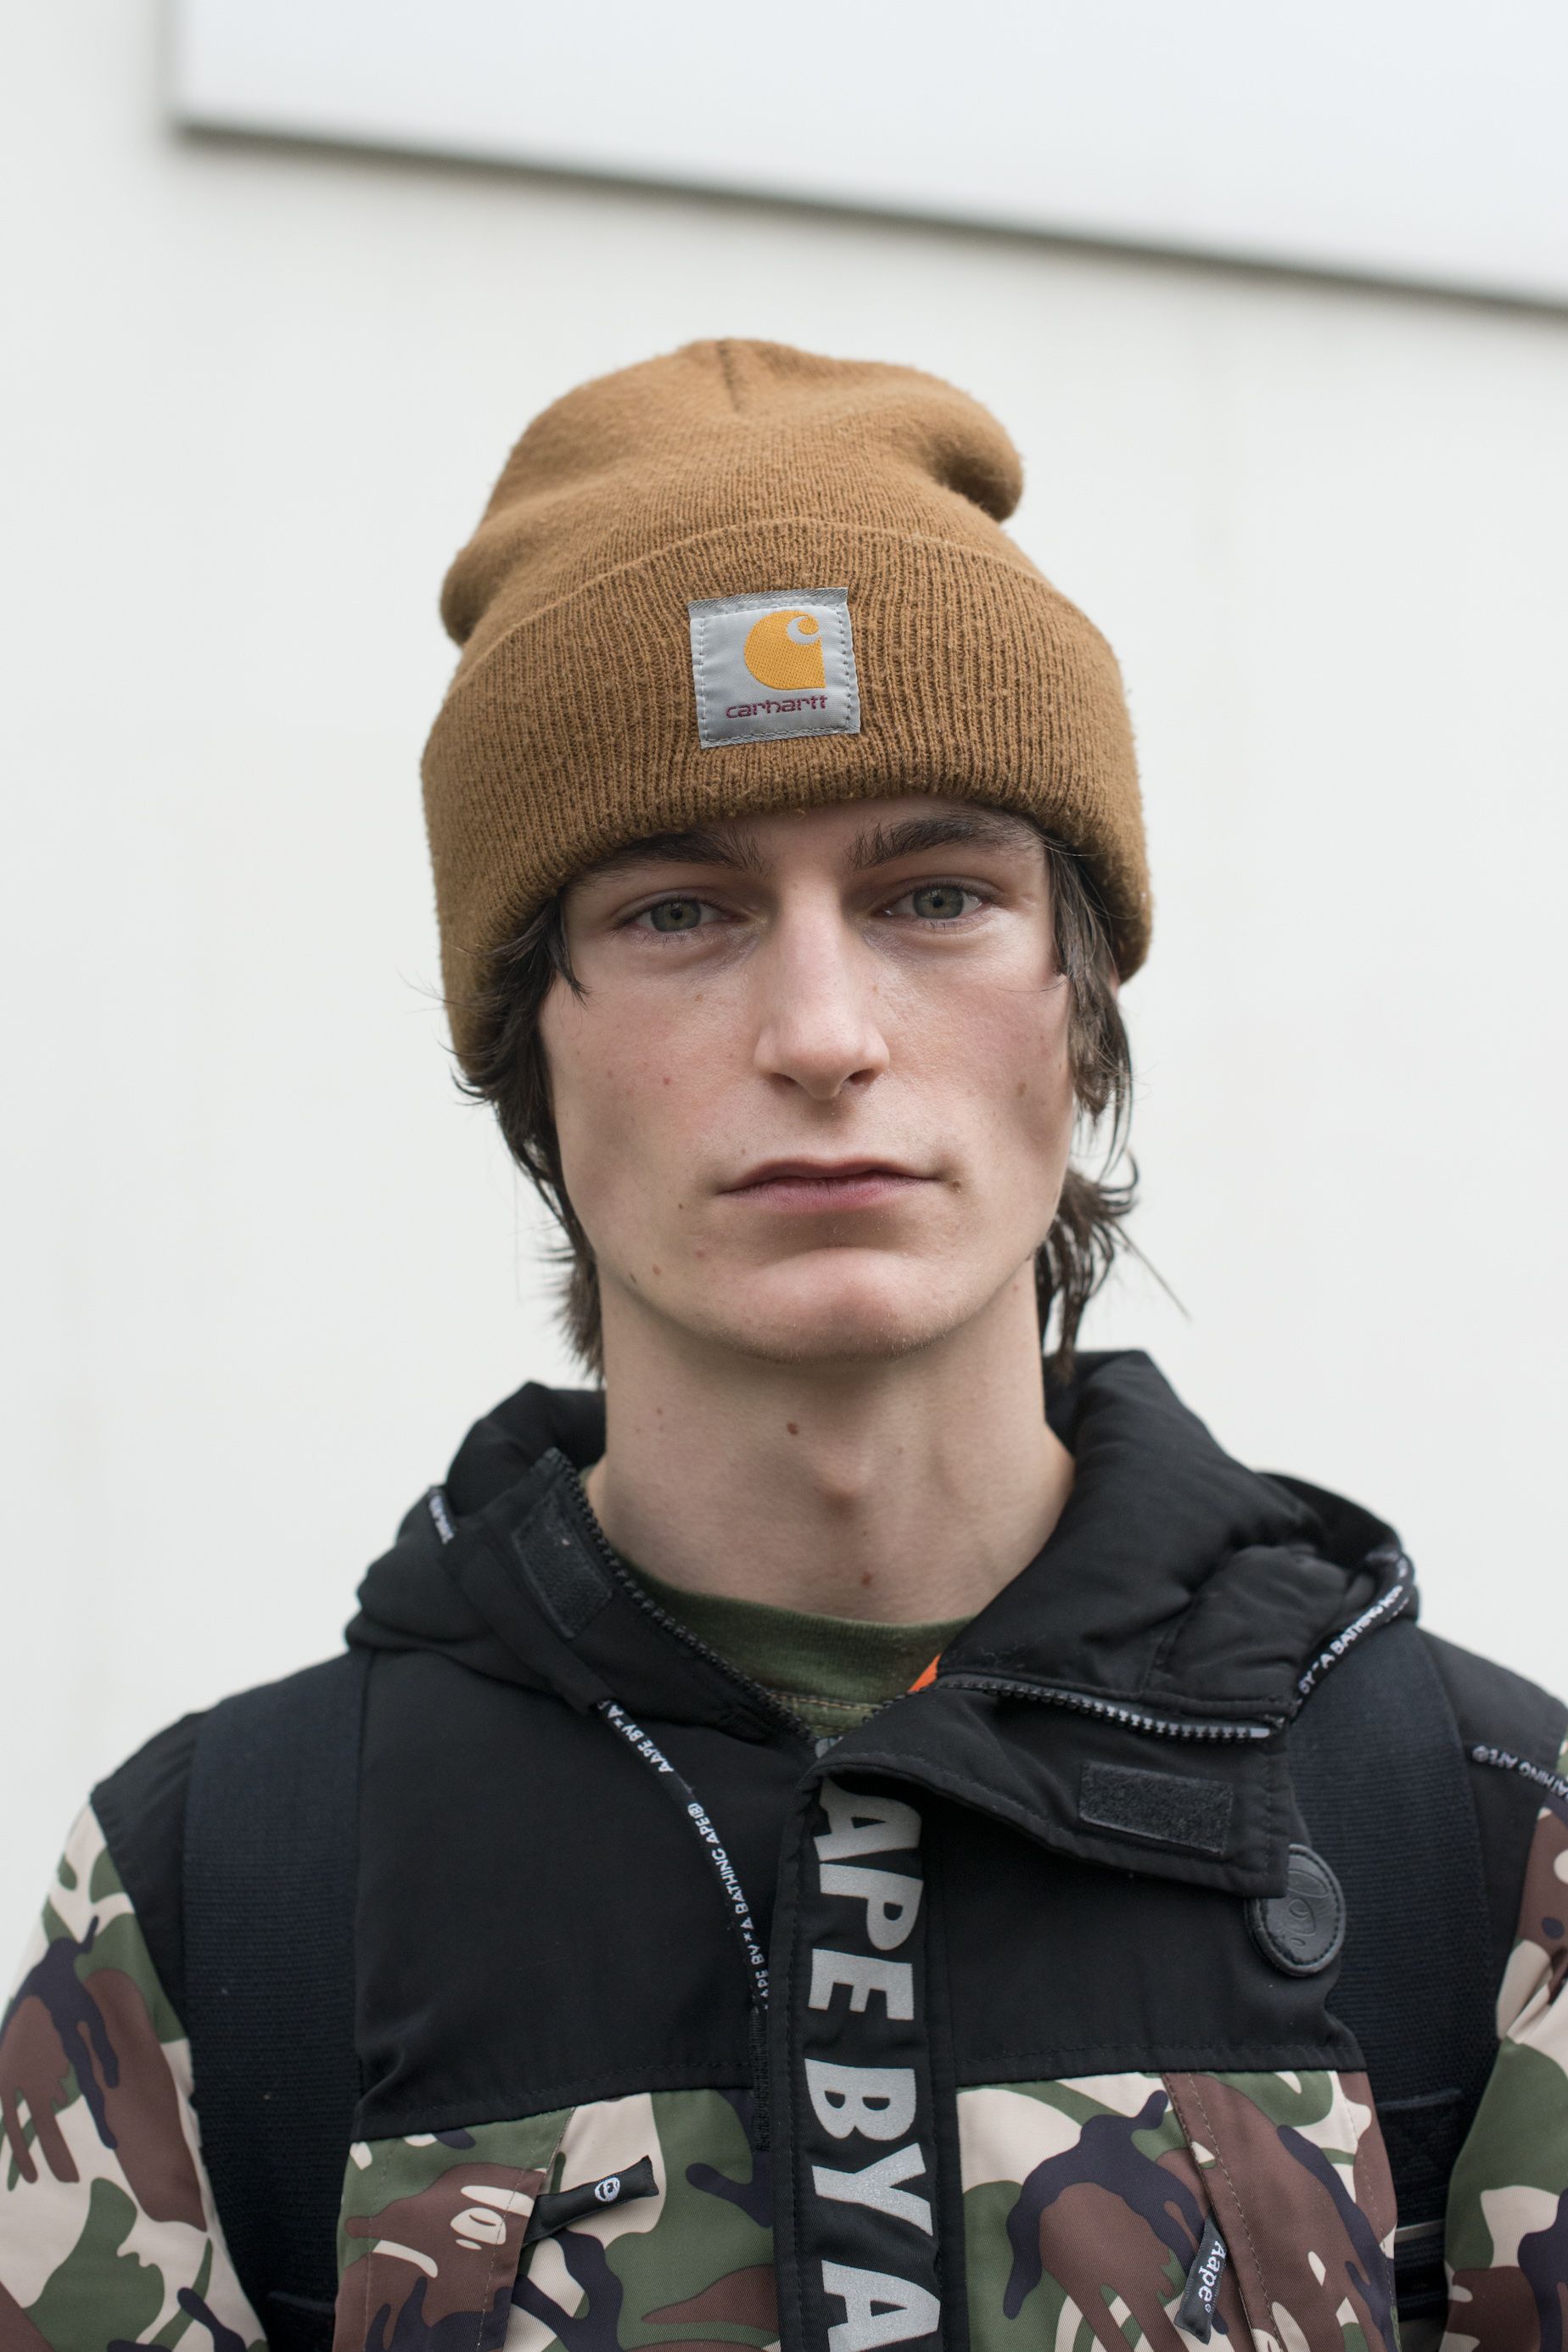 Carhartt's Most Popular Product is This Basic Beanie